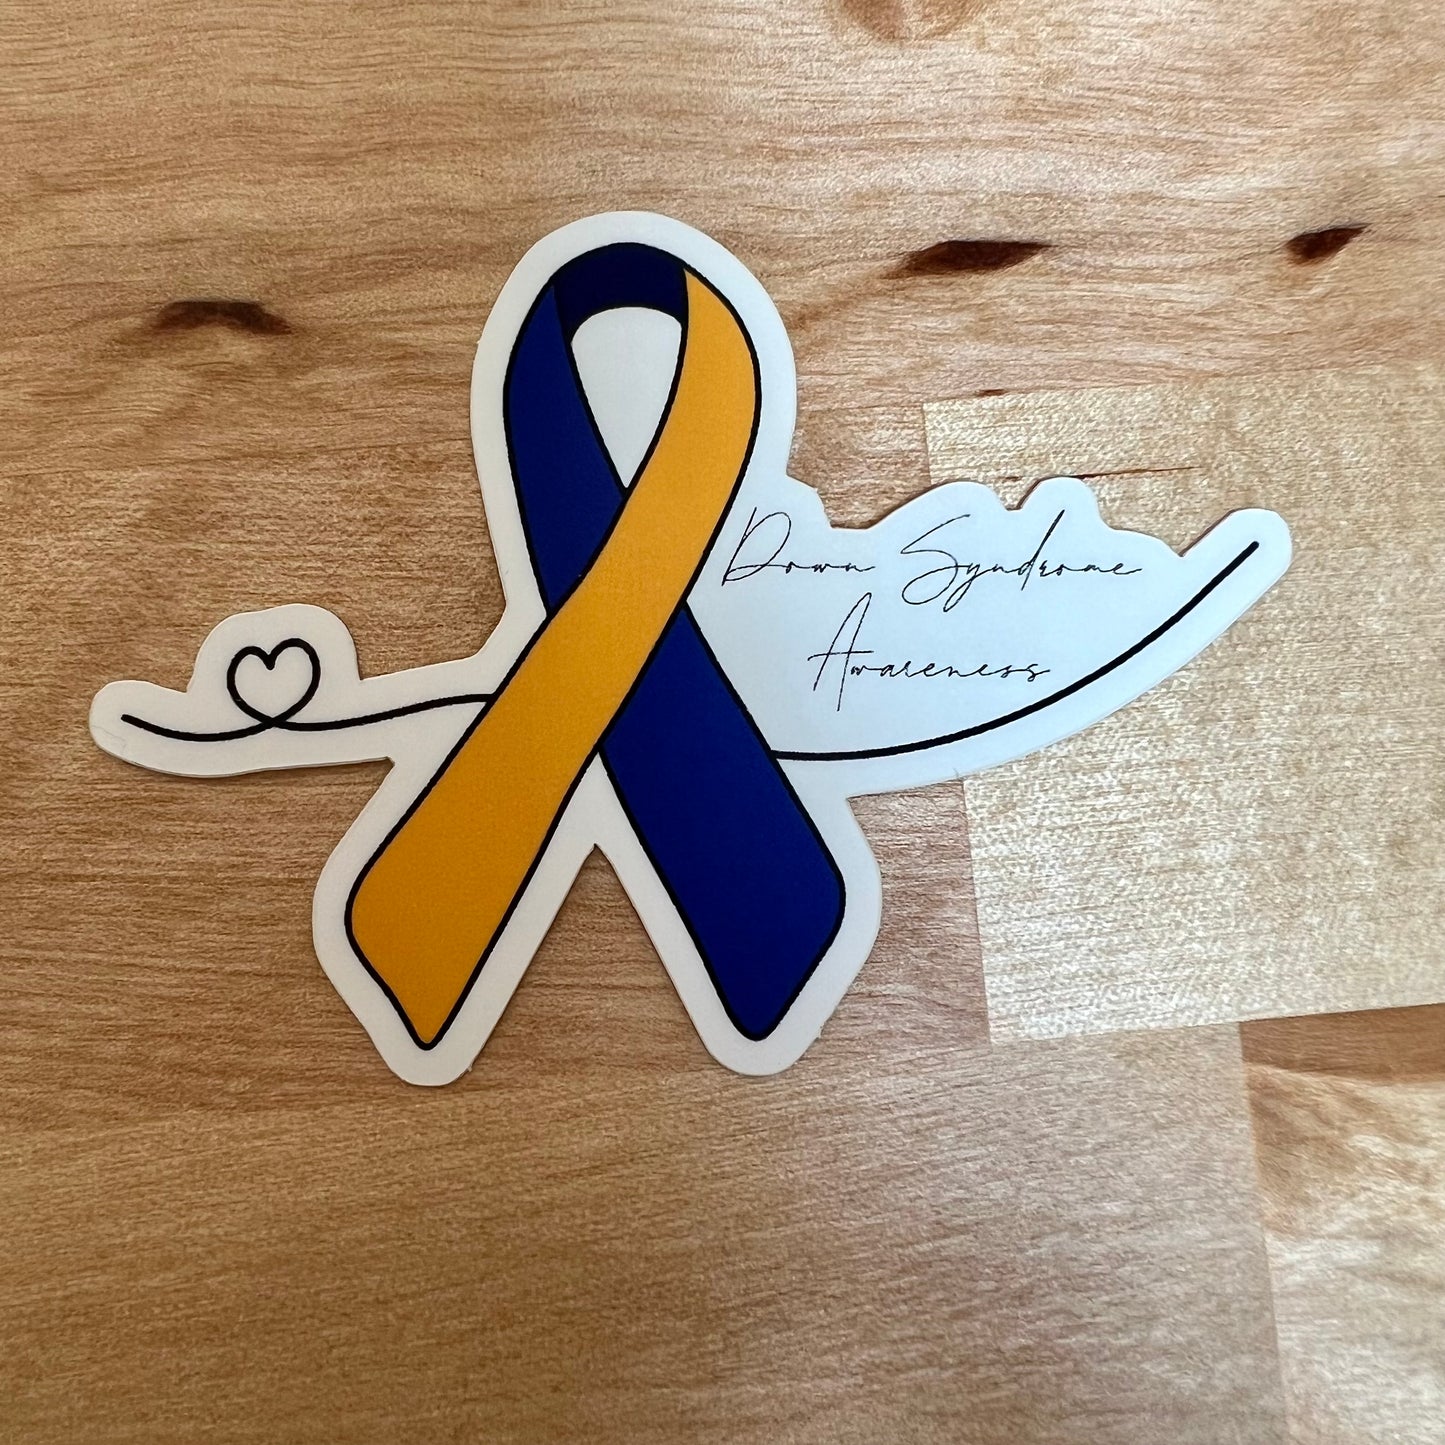 Down Syndrome Awareness Sticker